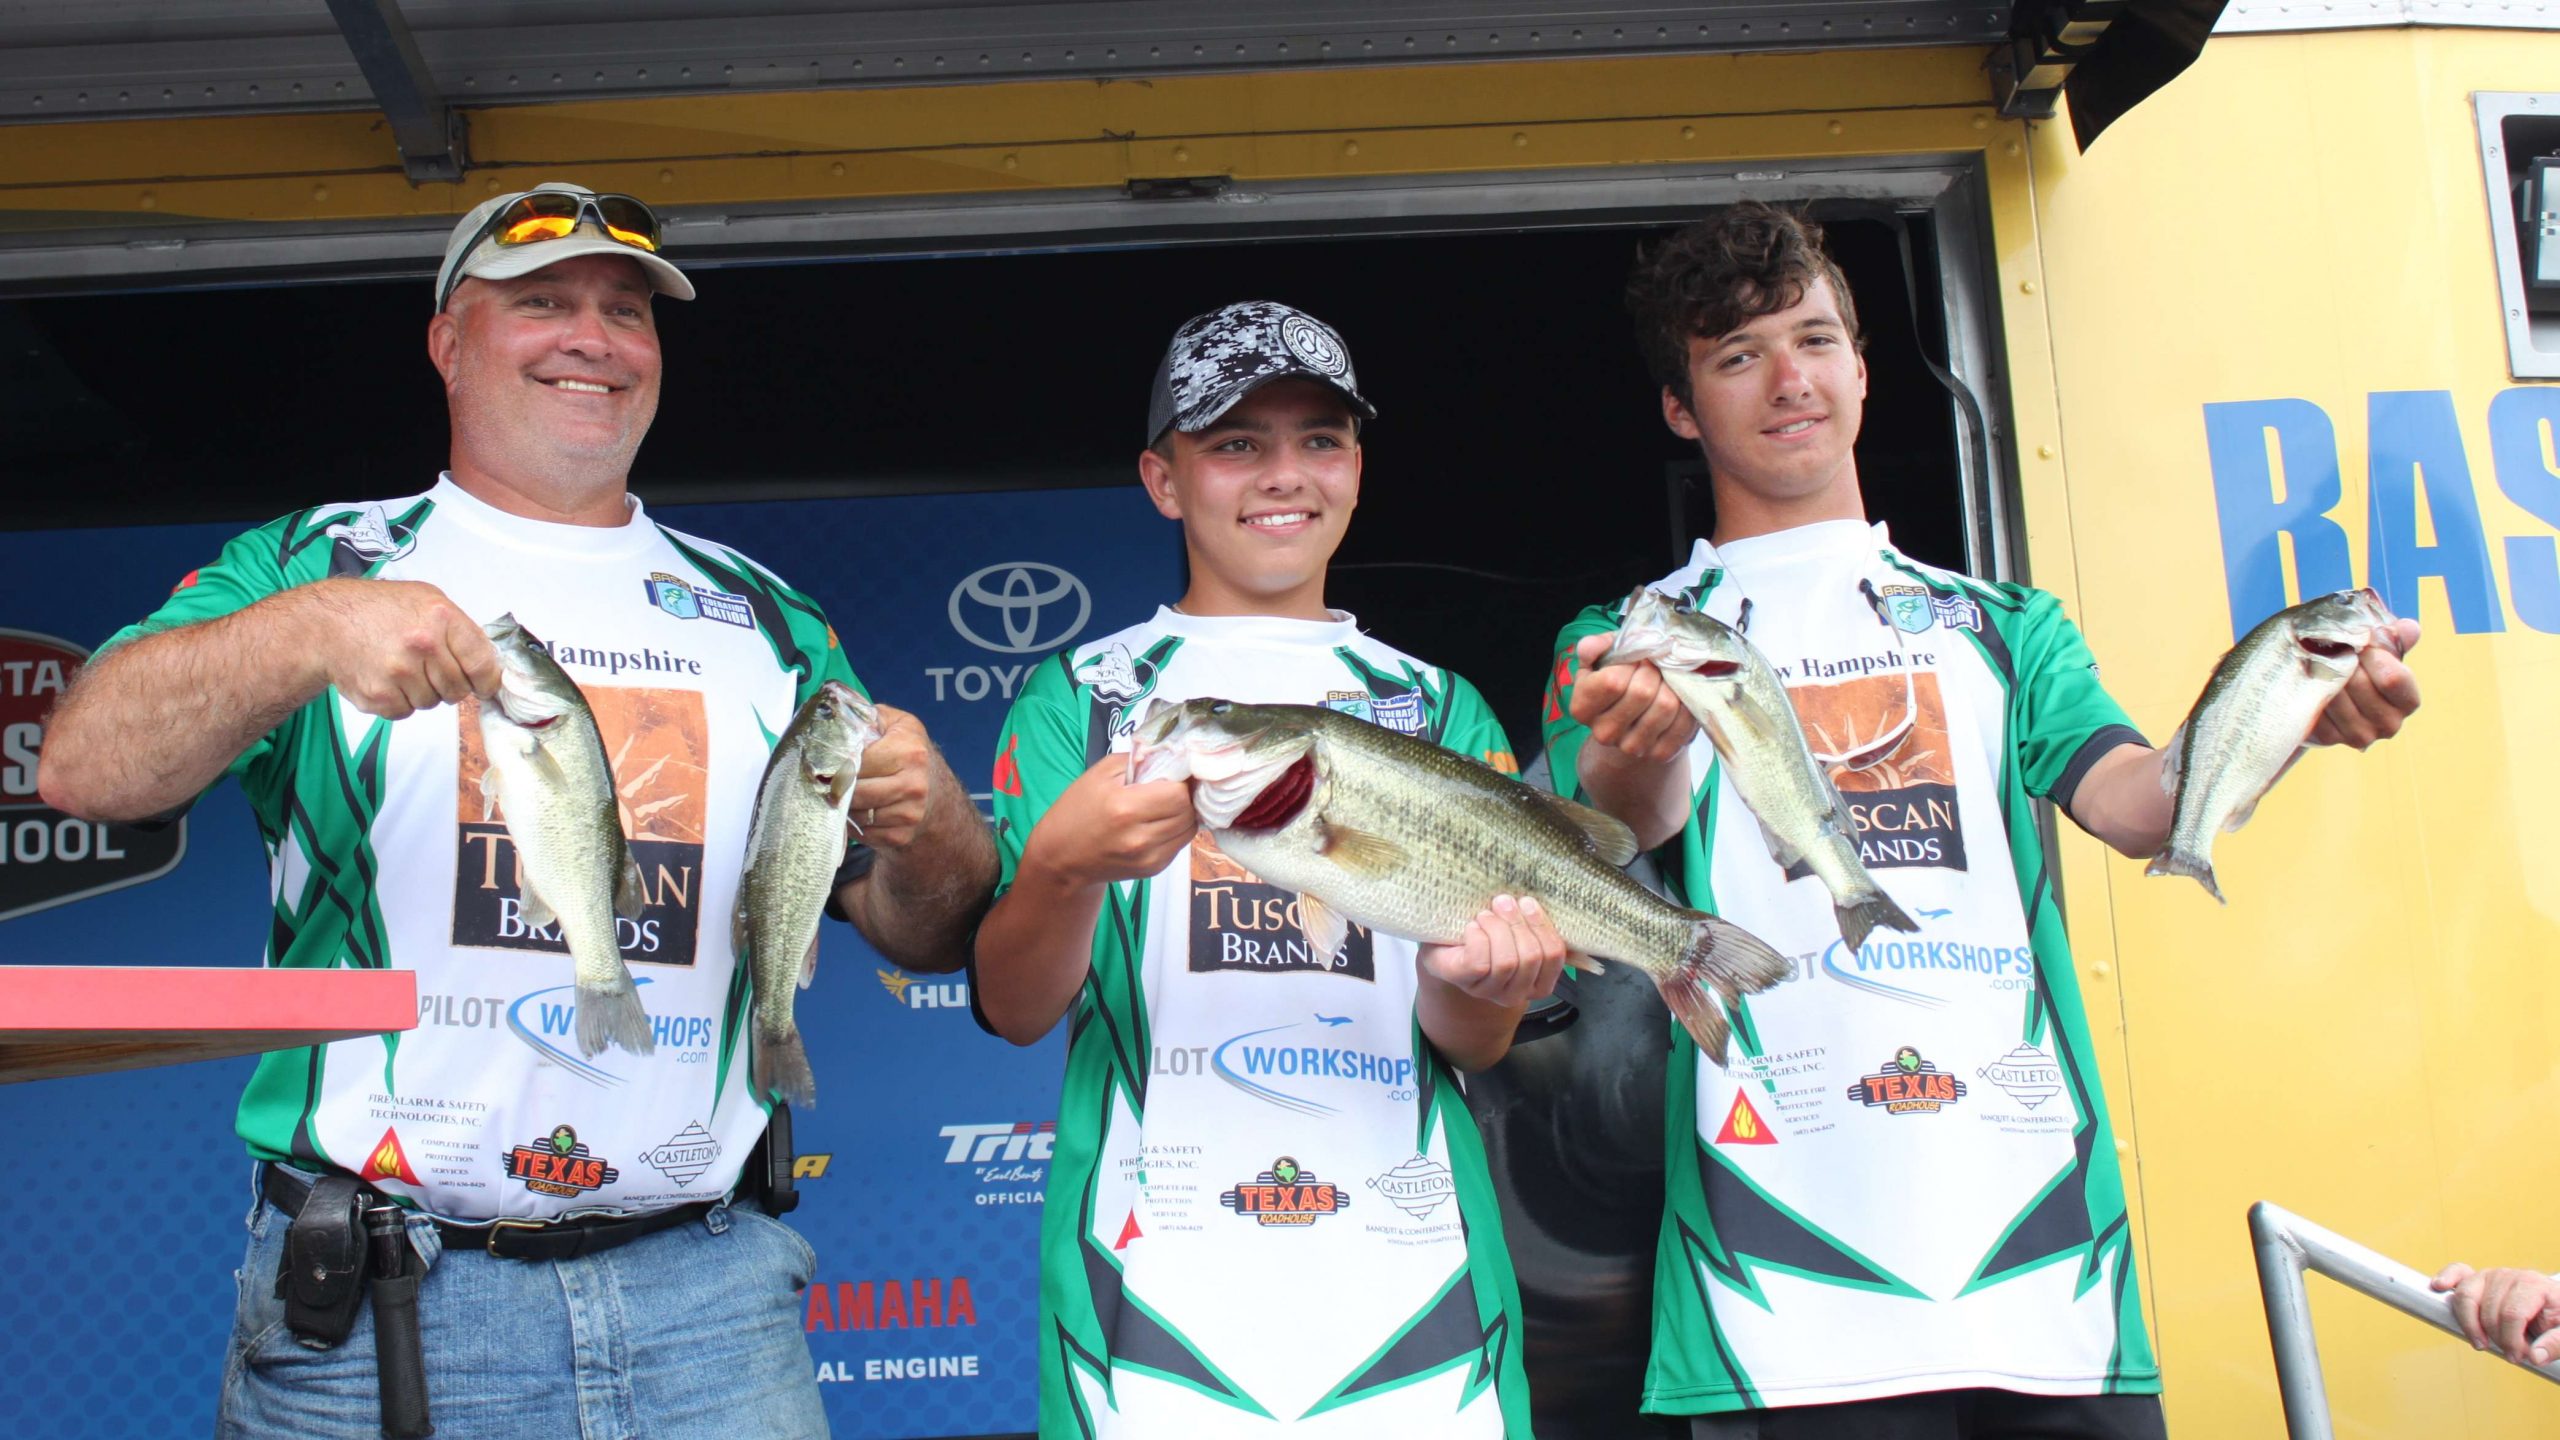 Team New Hampshire anglers Jack Armstrong and Logan Daniels fished themselves into second place on Tuesday with a five-fish limit of 7-15. Here the boys and their coach display their haul.